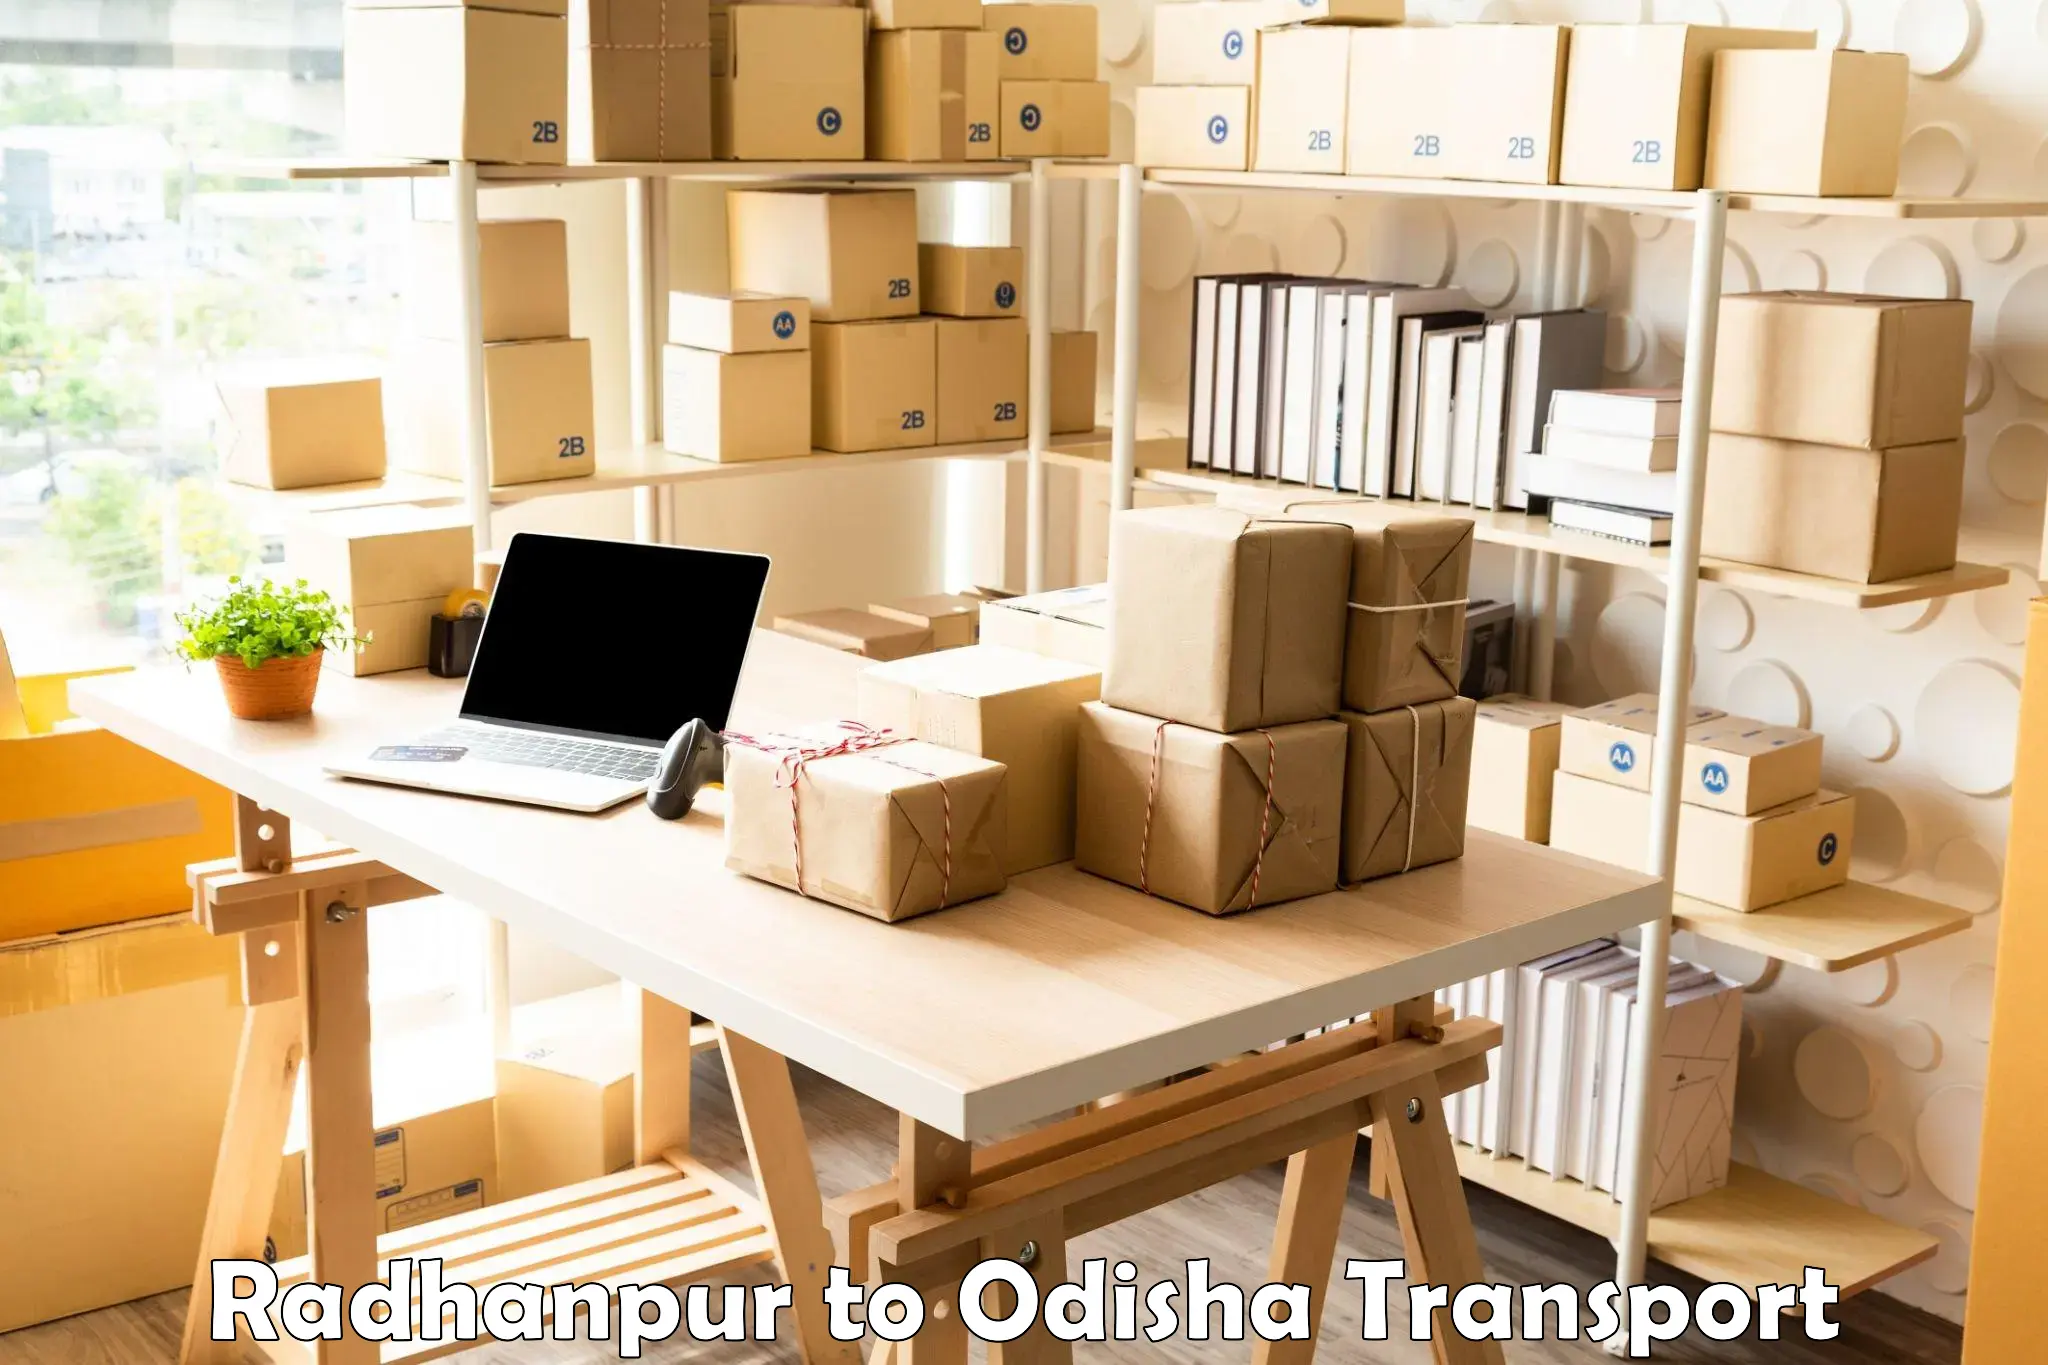 Air freight transport services Radhanpur to Champua